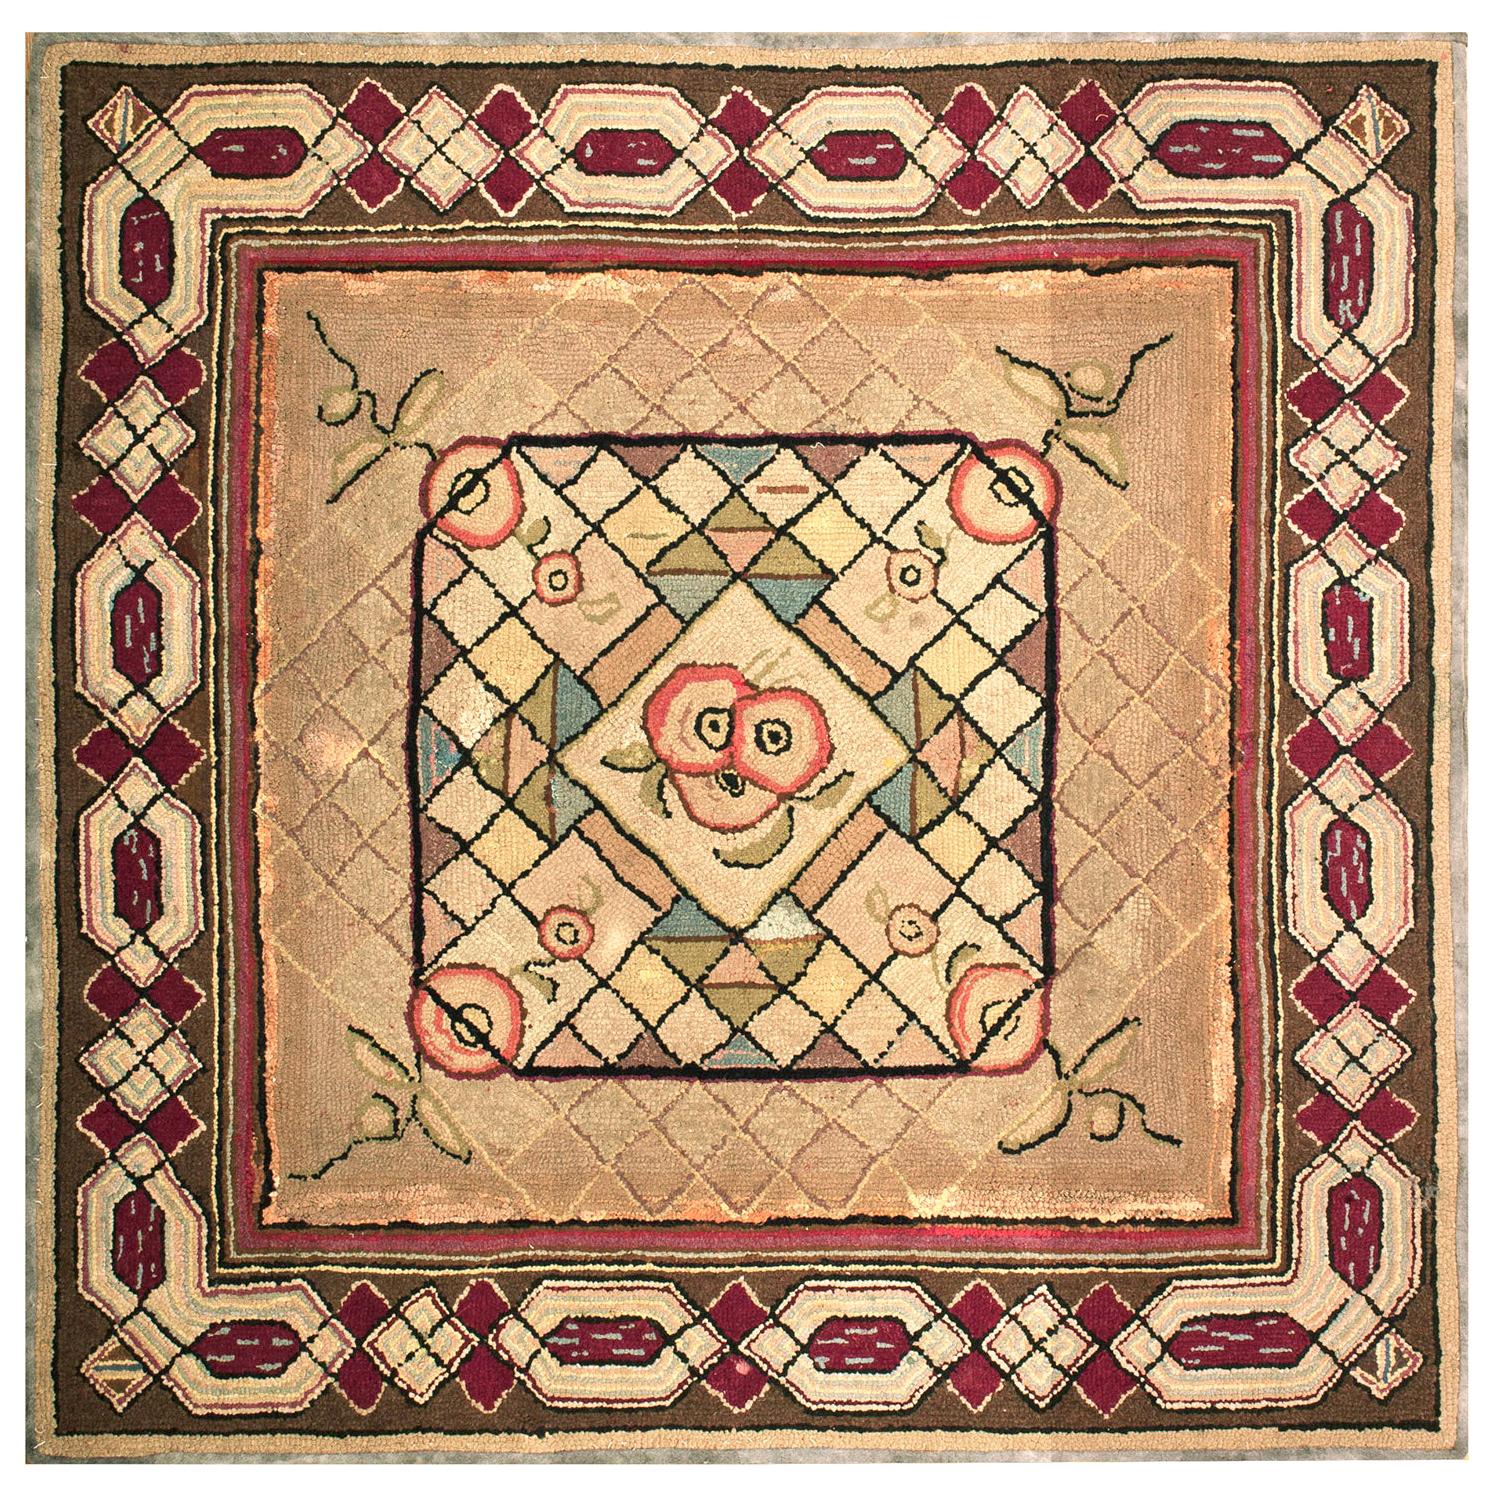 Antique American Hooked Rug 4' 2" x 4' 2" For Sale